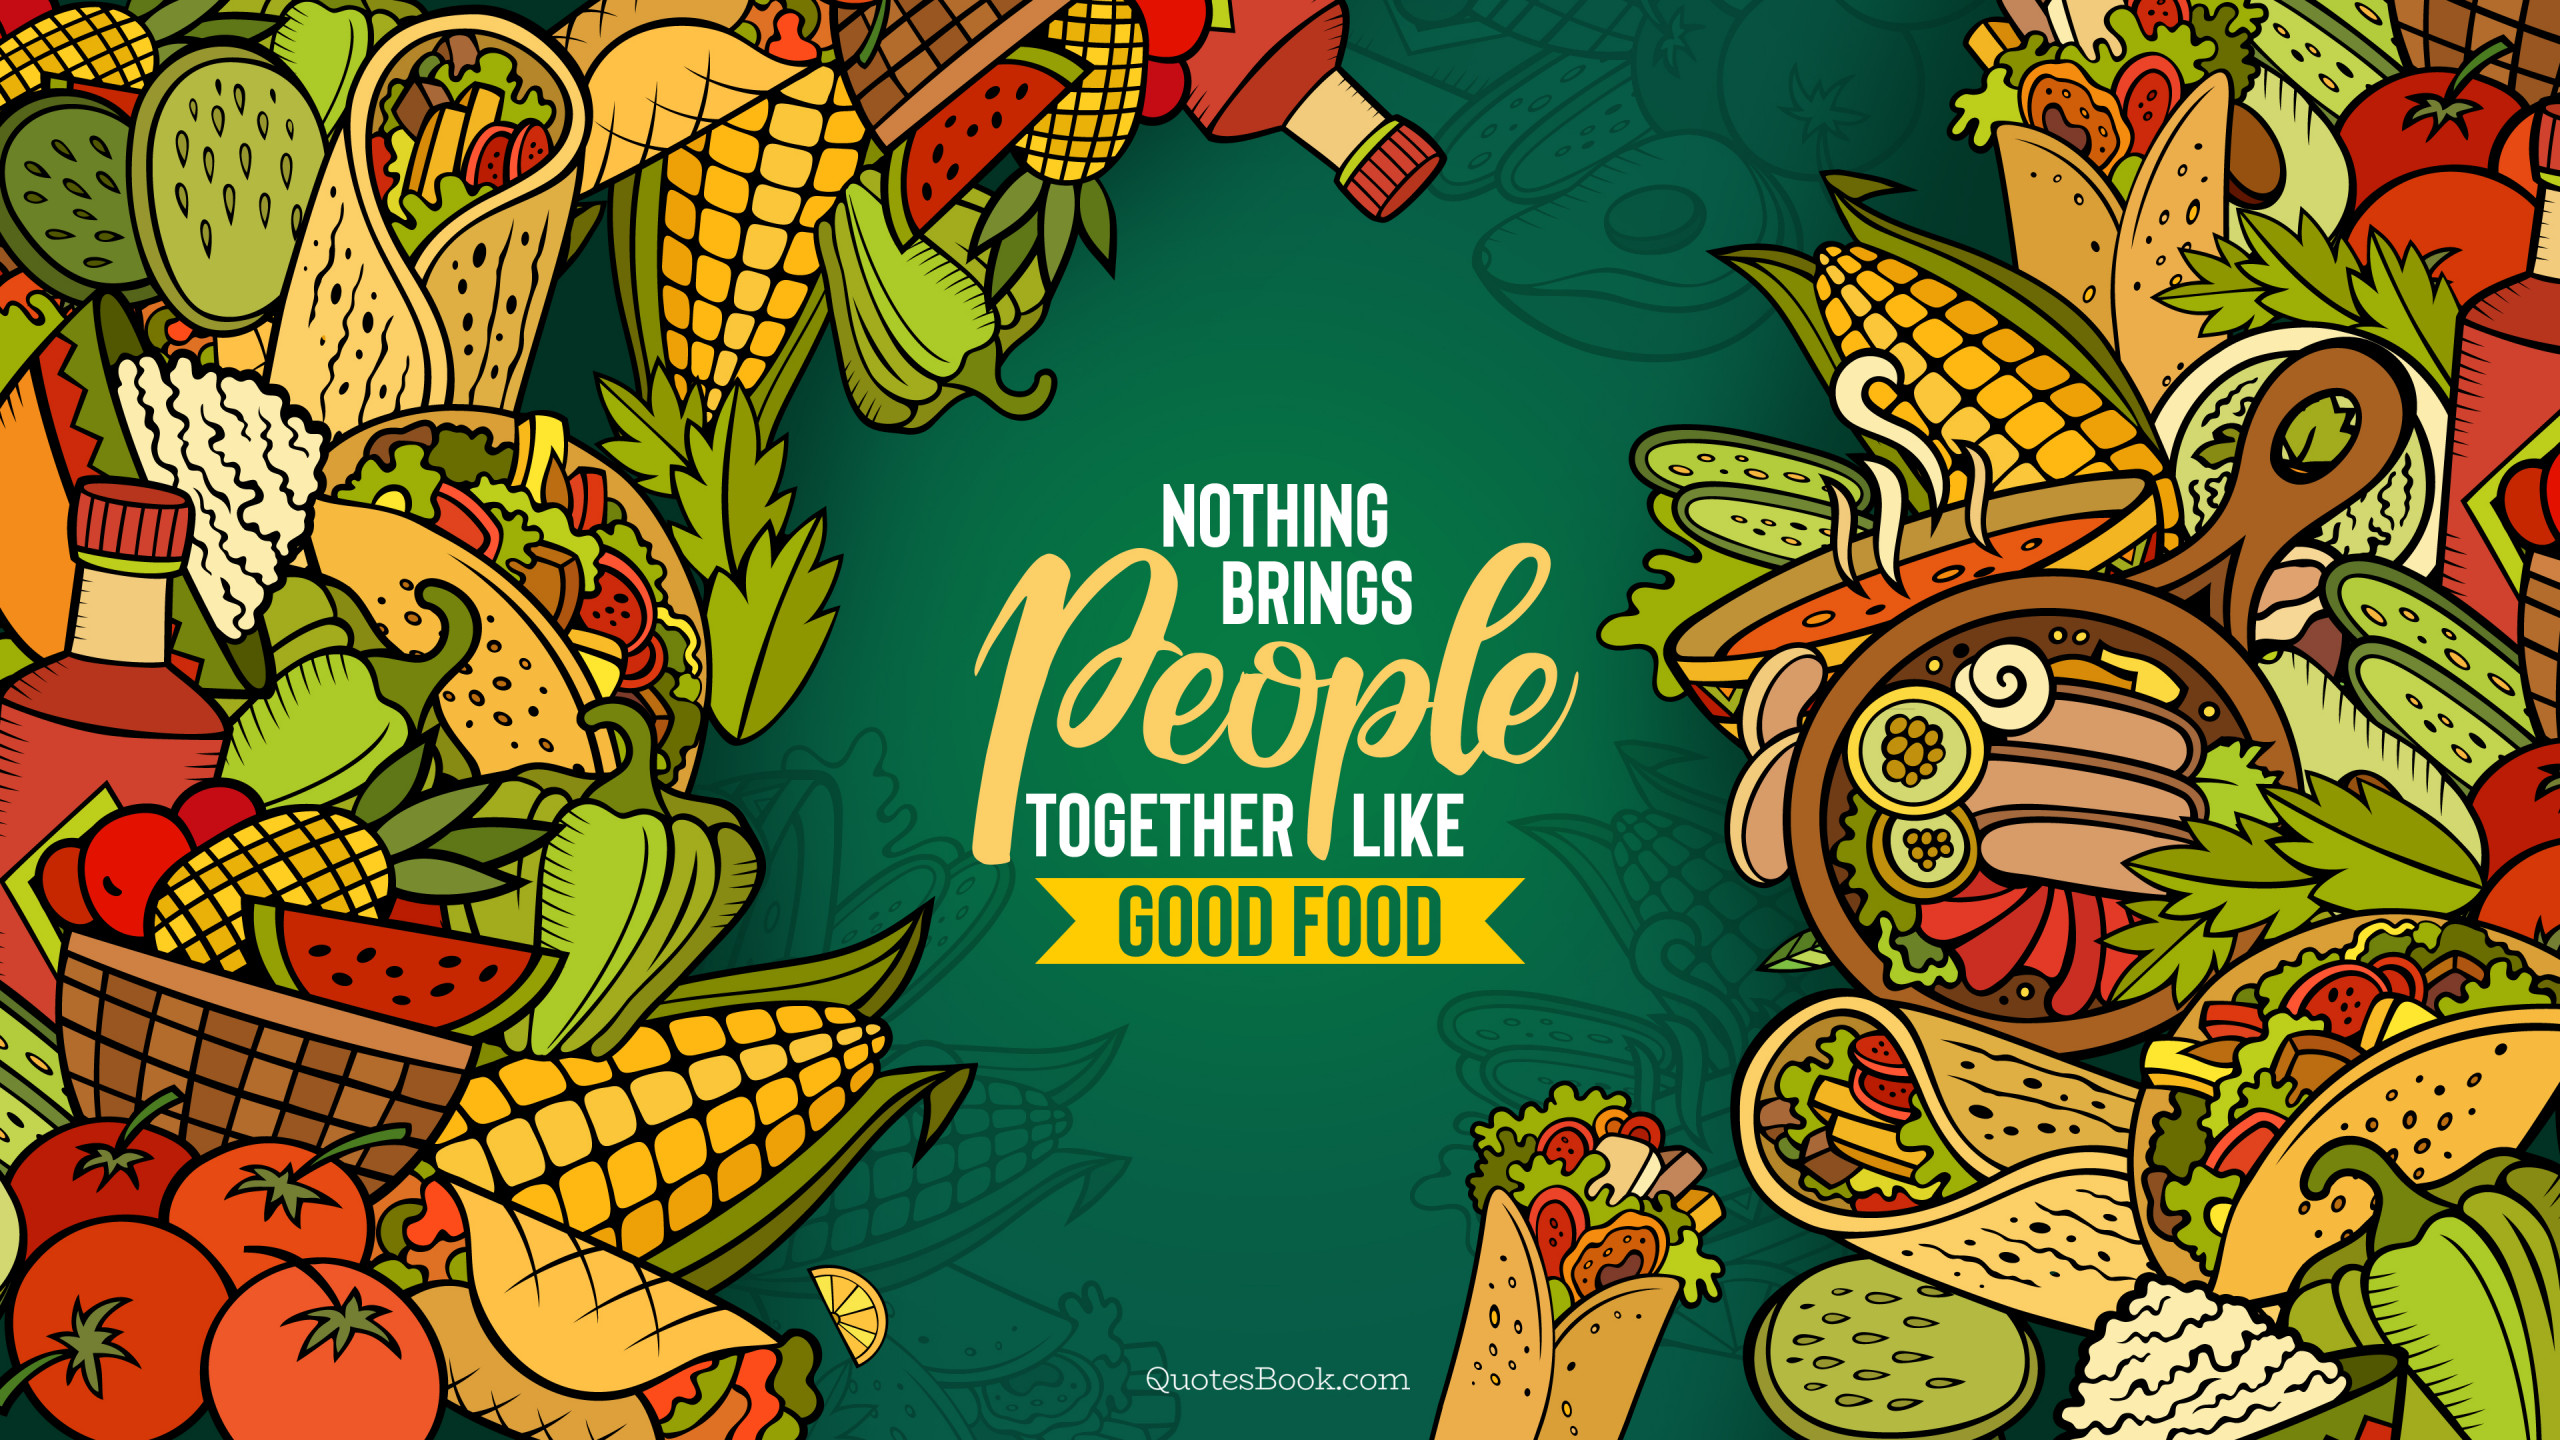 Nothing brings people together like good food - Page 3 - QuotesBook